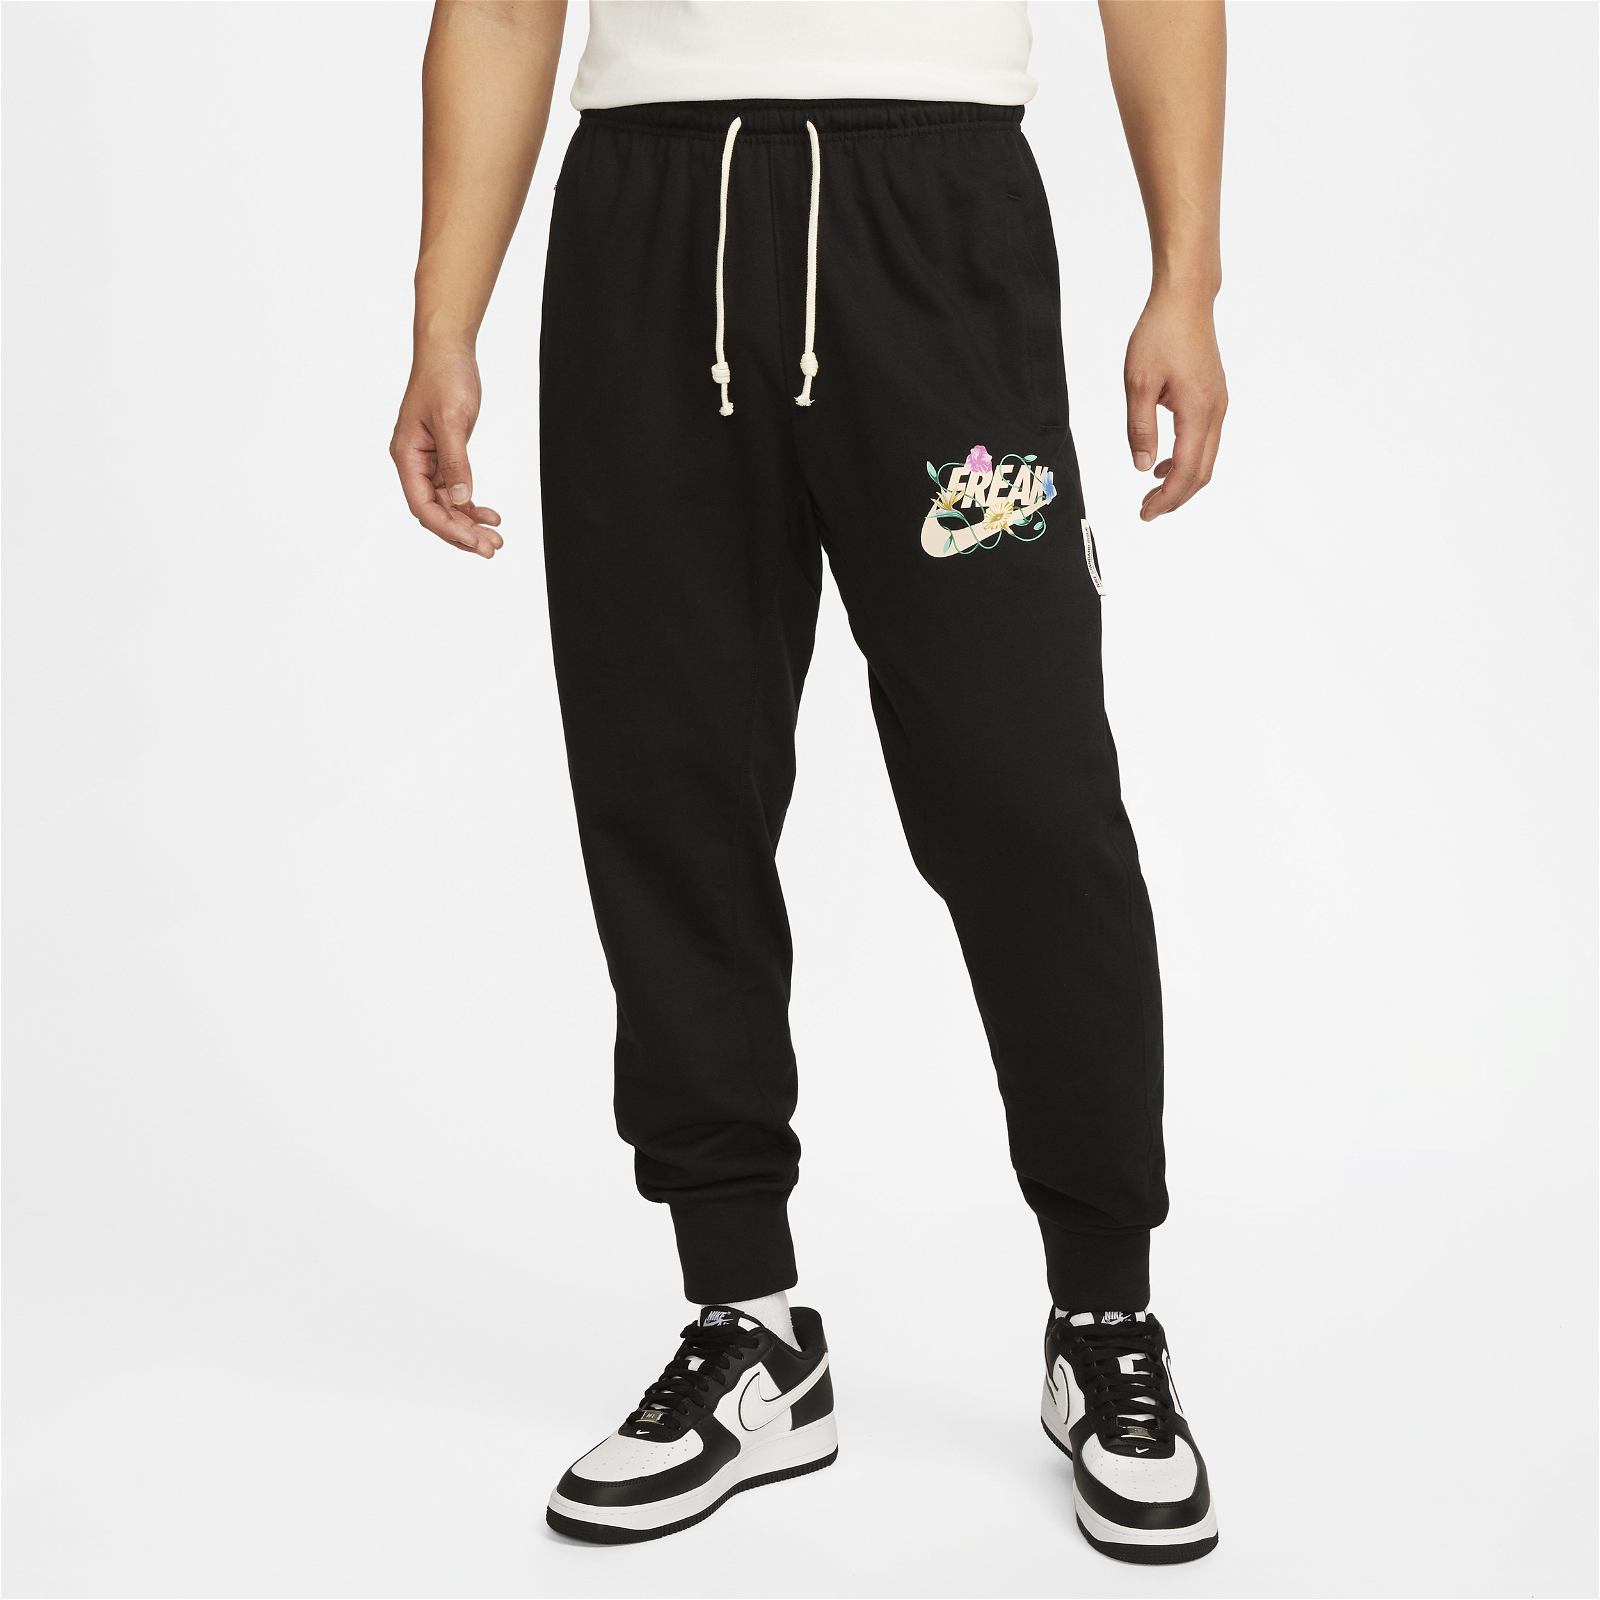 Dri-FIT Giannis Standard Issue Basketball Pants